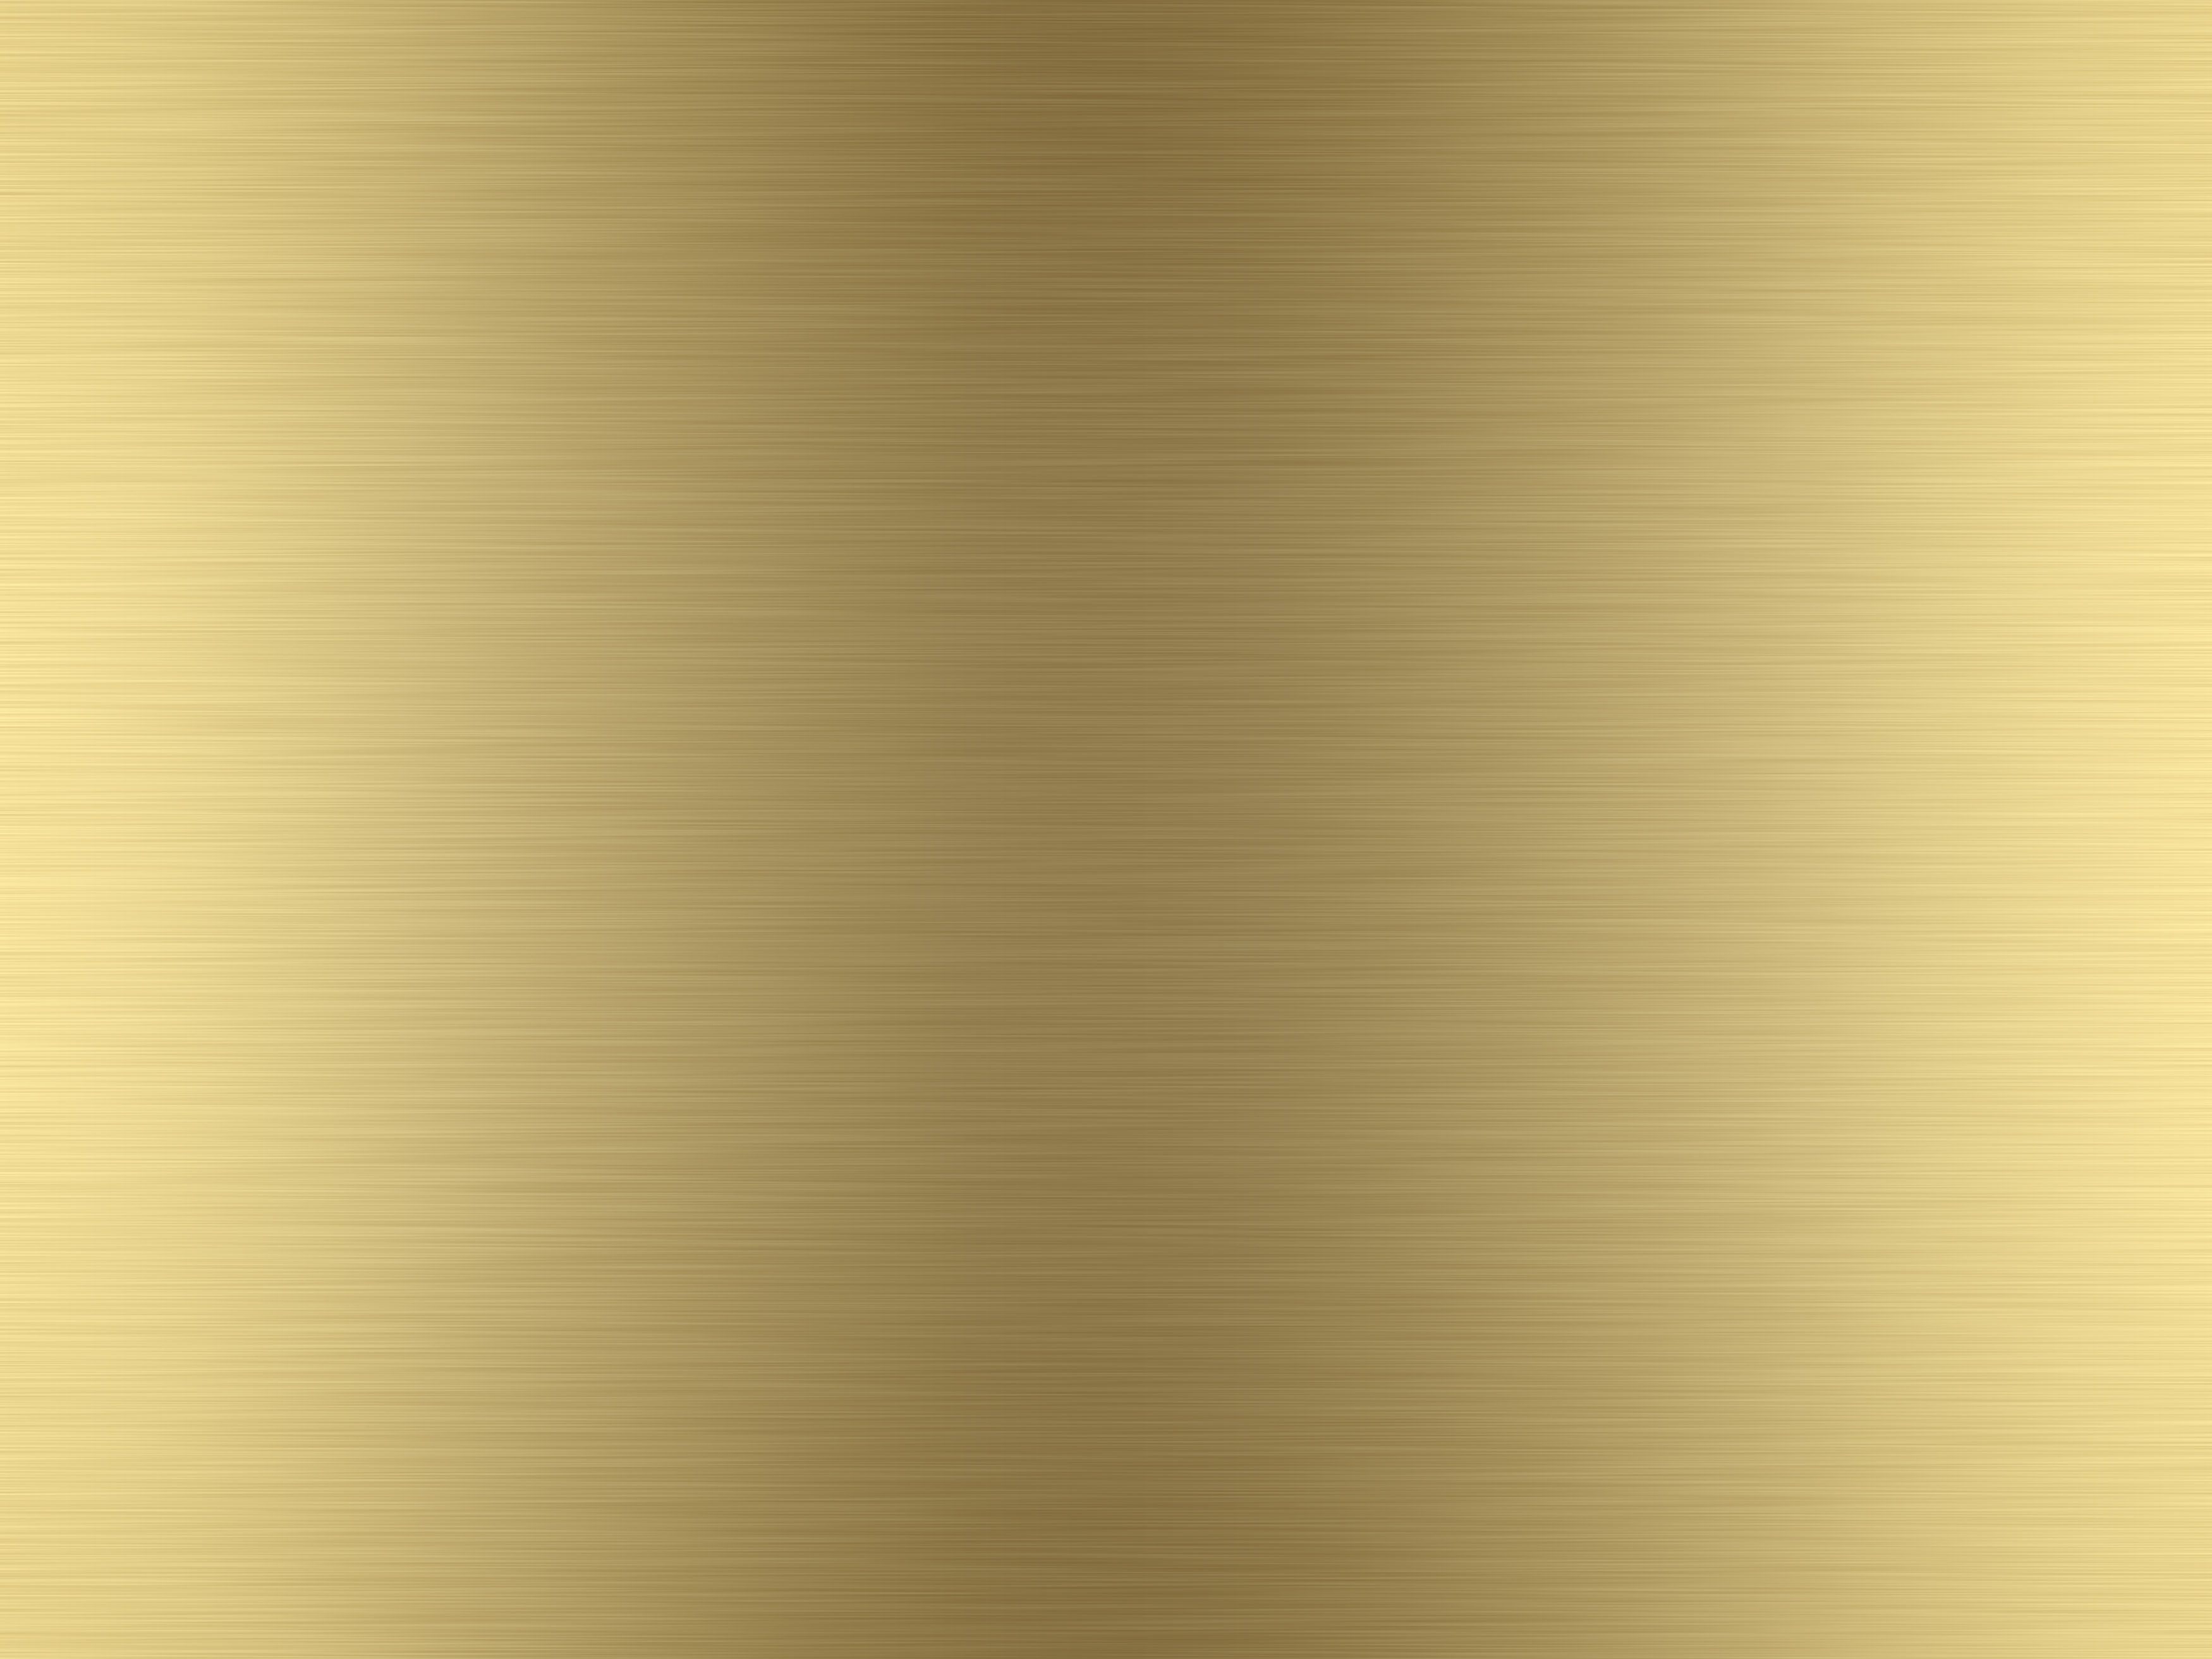 Rendered Lightly Brushed Gold Background Texture With Image